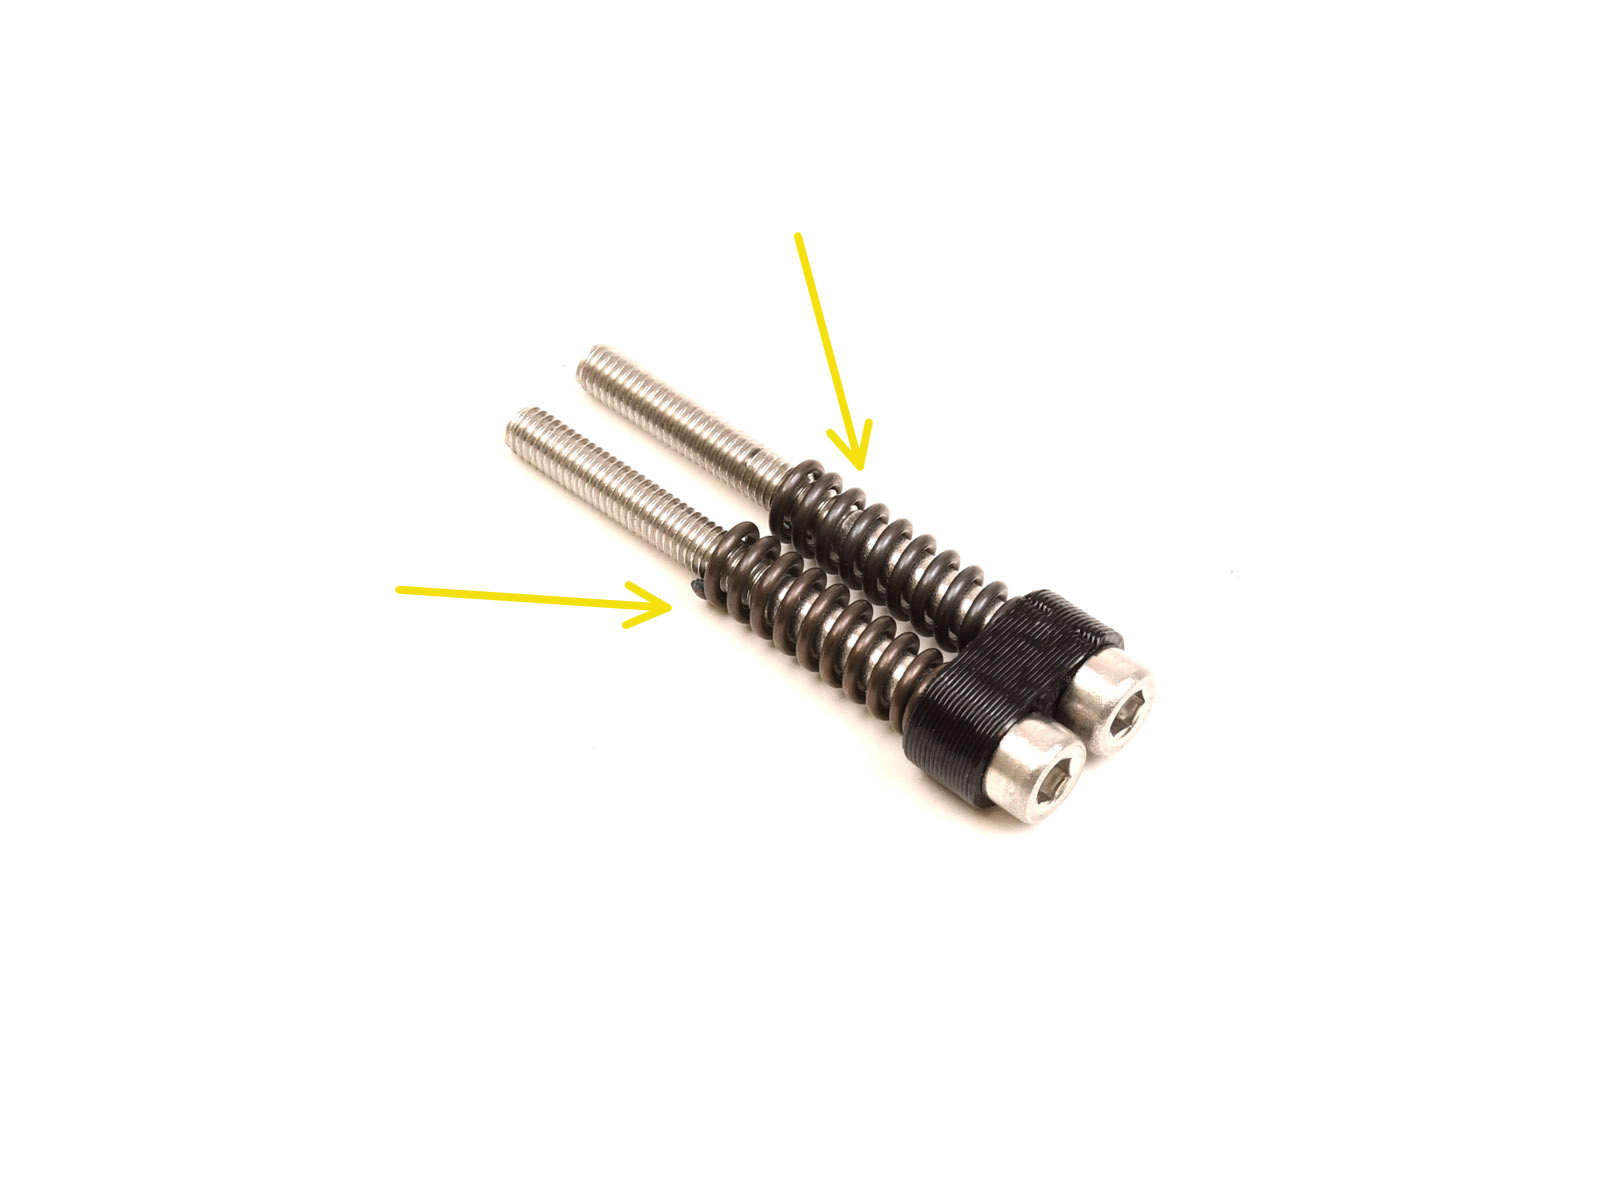 Tension screws assembly